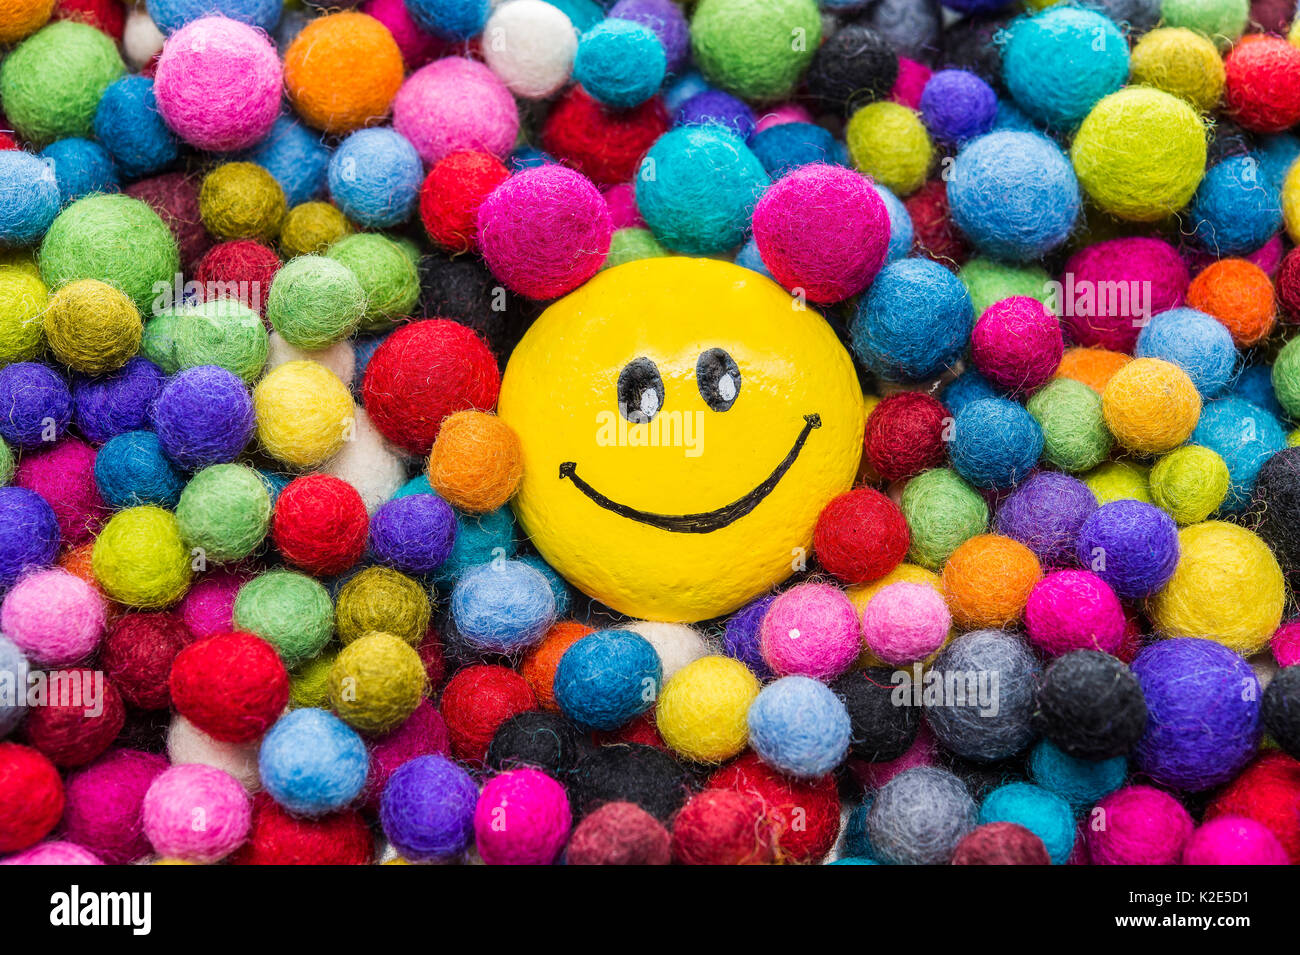 Smiley face made of stone, painted yellow, laughing, lies in between colorful felt balls Stock Photo